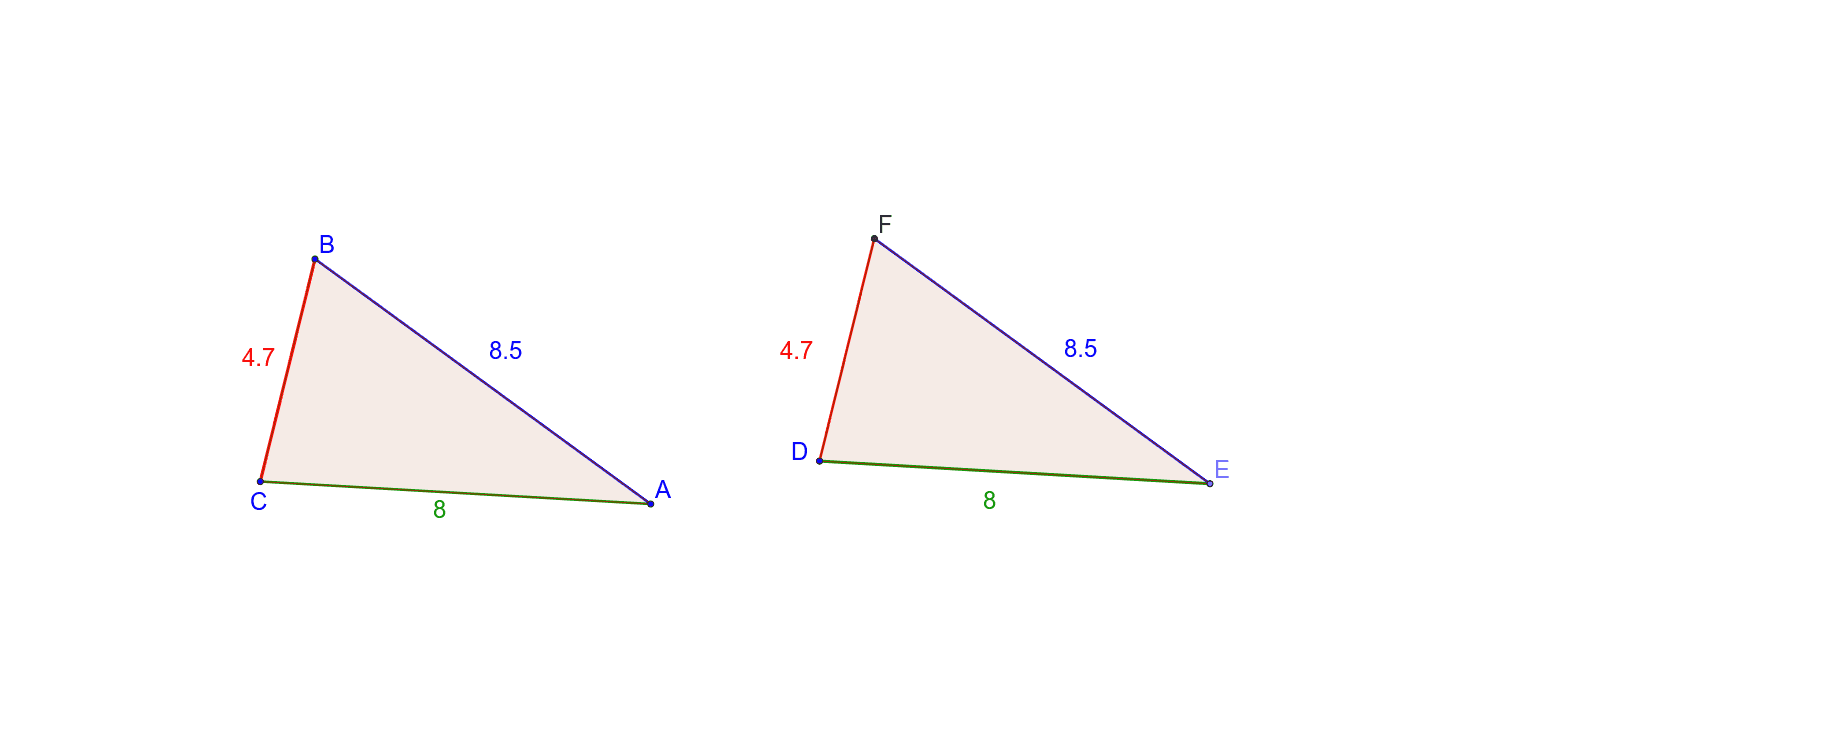 Drag any point on triangle ABC to resize the triangle. Study what happens to triangle EFD when you resize triangle ABC. Also try to coincide (put one triangle on top of the other) and see if they match up. Press Enter to start activity